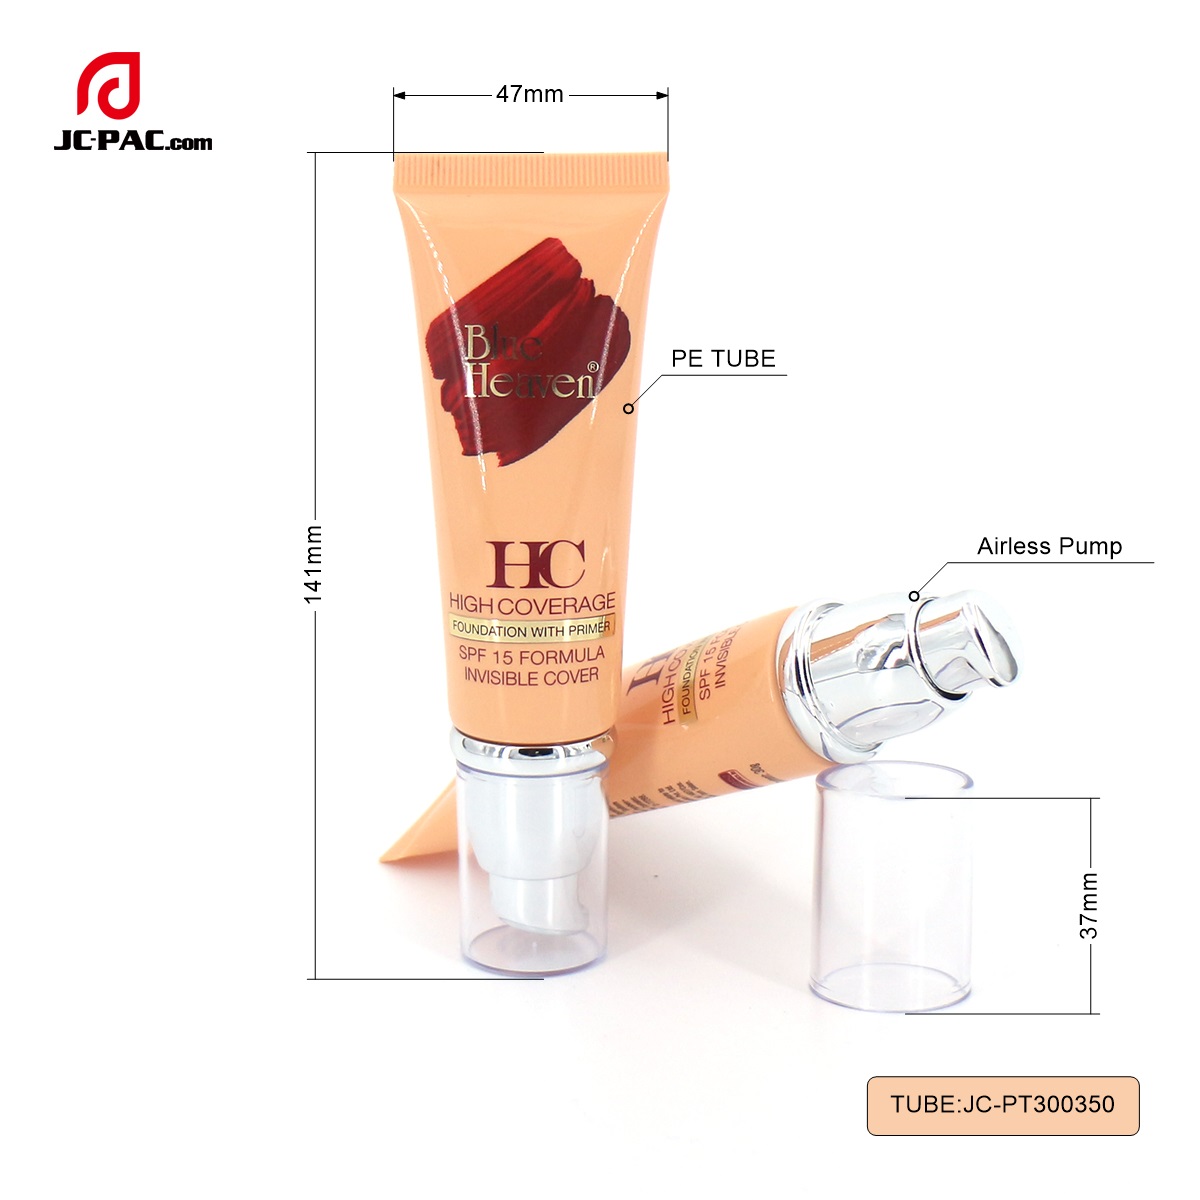 PT300350 Diameter 30mm 50g Foundation Cosmetic Tube Empty Squeeze Soft Tube with Silver Airless Pump 